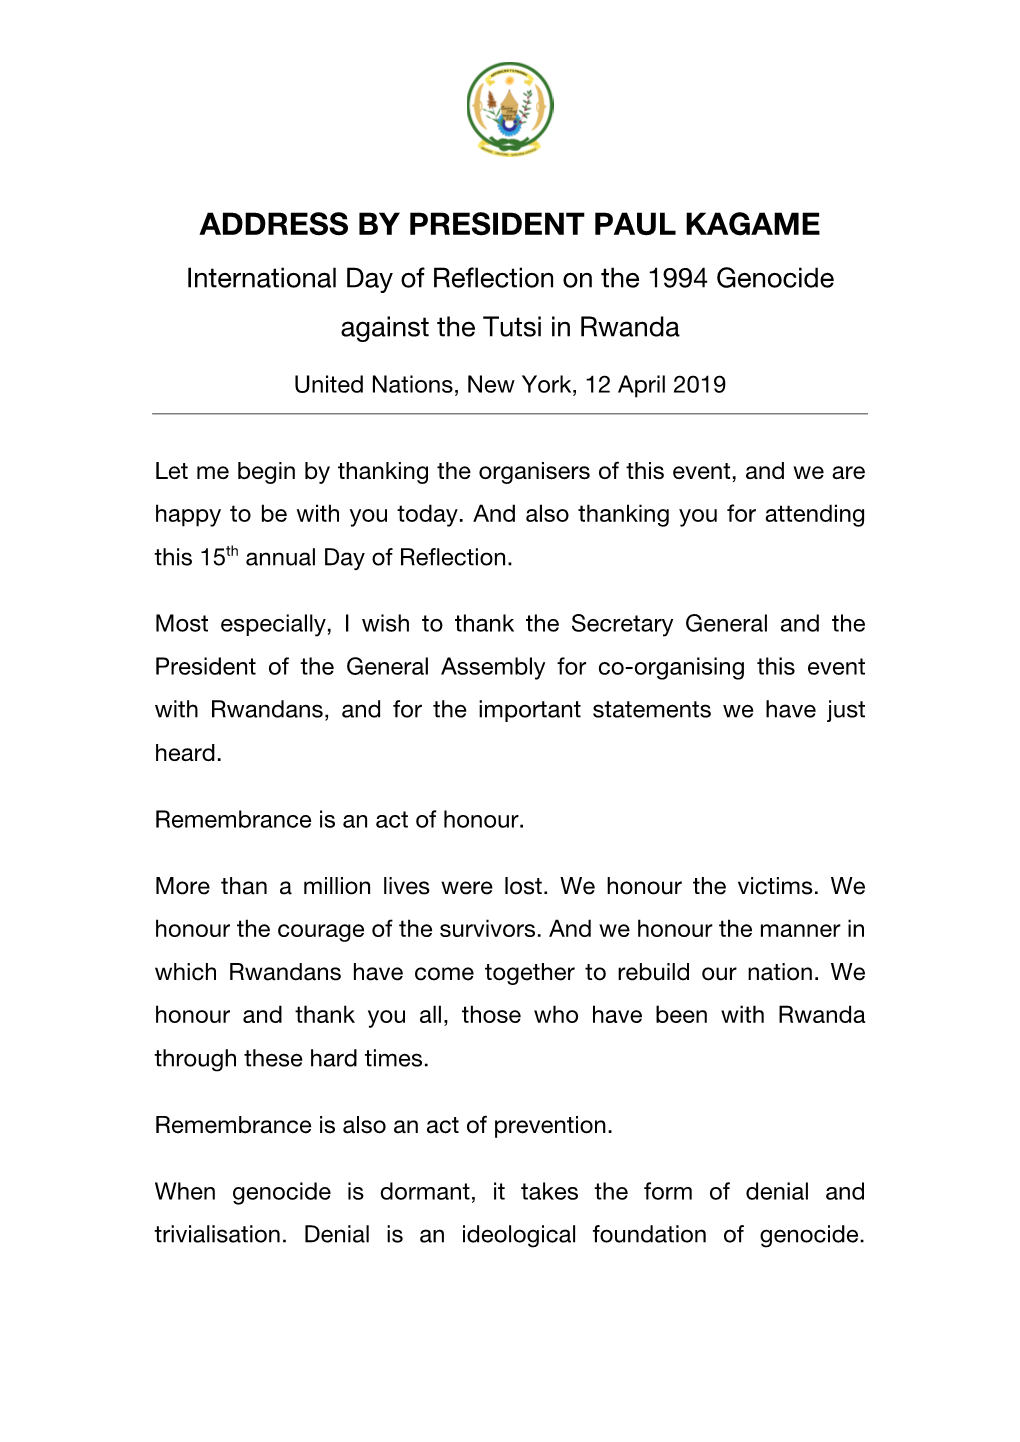 ADDRESS by PRESIDENT PAUL KAGAME International Day of Reflection on the 1994 Genocide Against the Tutsi in Rwanda